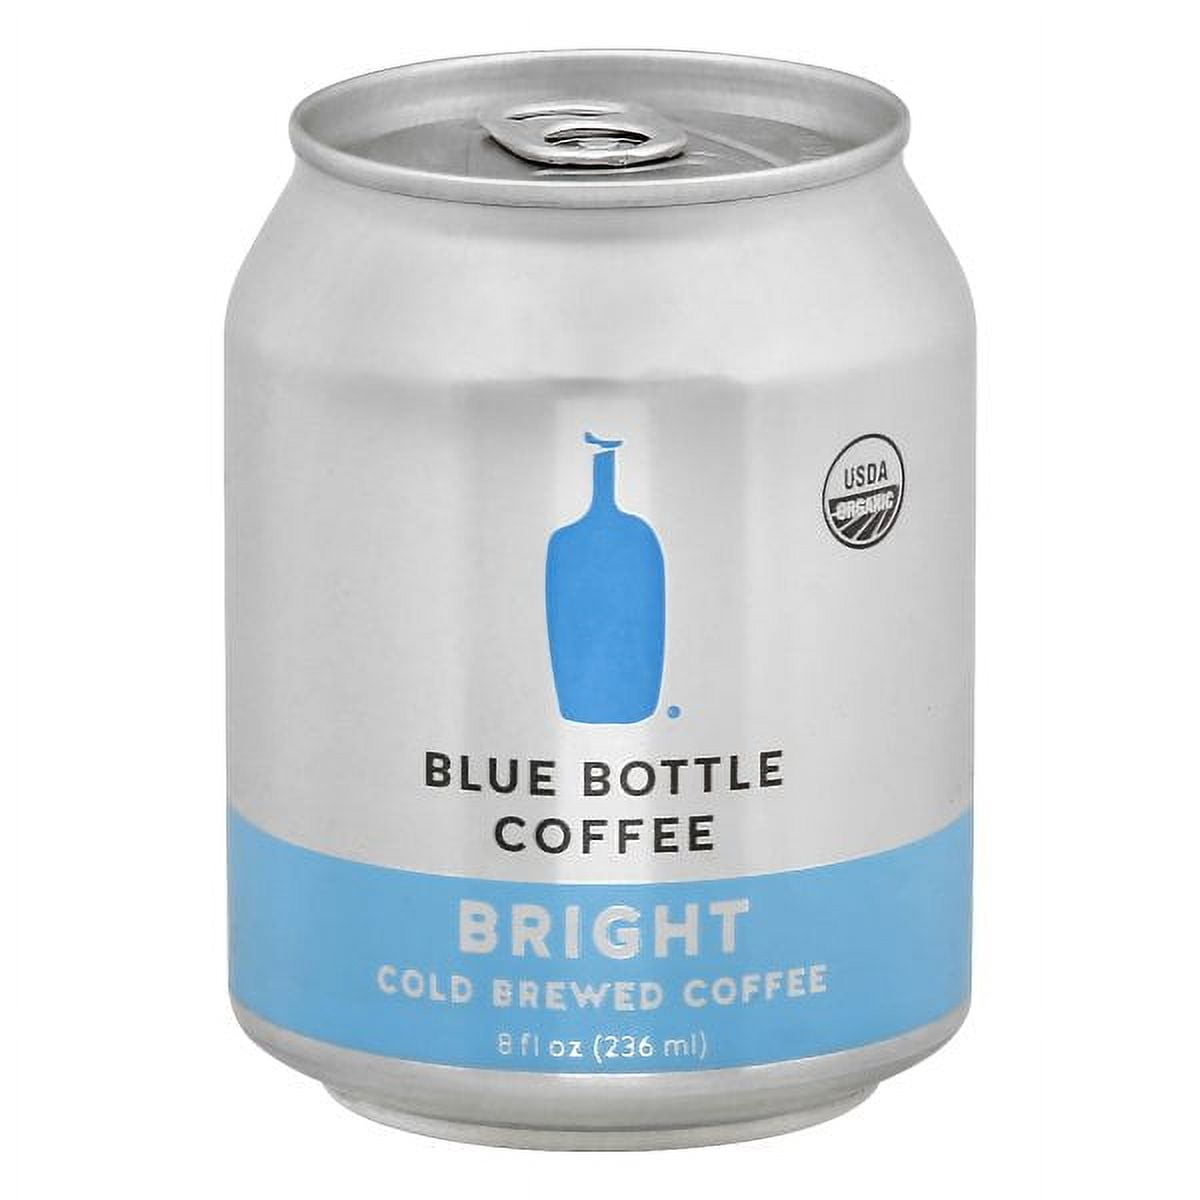 BLUE BOTTLE BRIGHT COLD BREW COFFEE 8OZ CAN  #gethilo On-Demand Delivery  or Curbside Pickup in LA, LBC, and Costa Mesa!